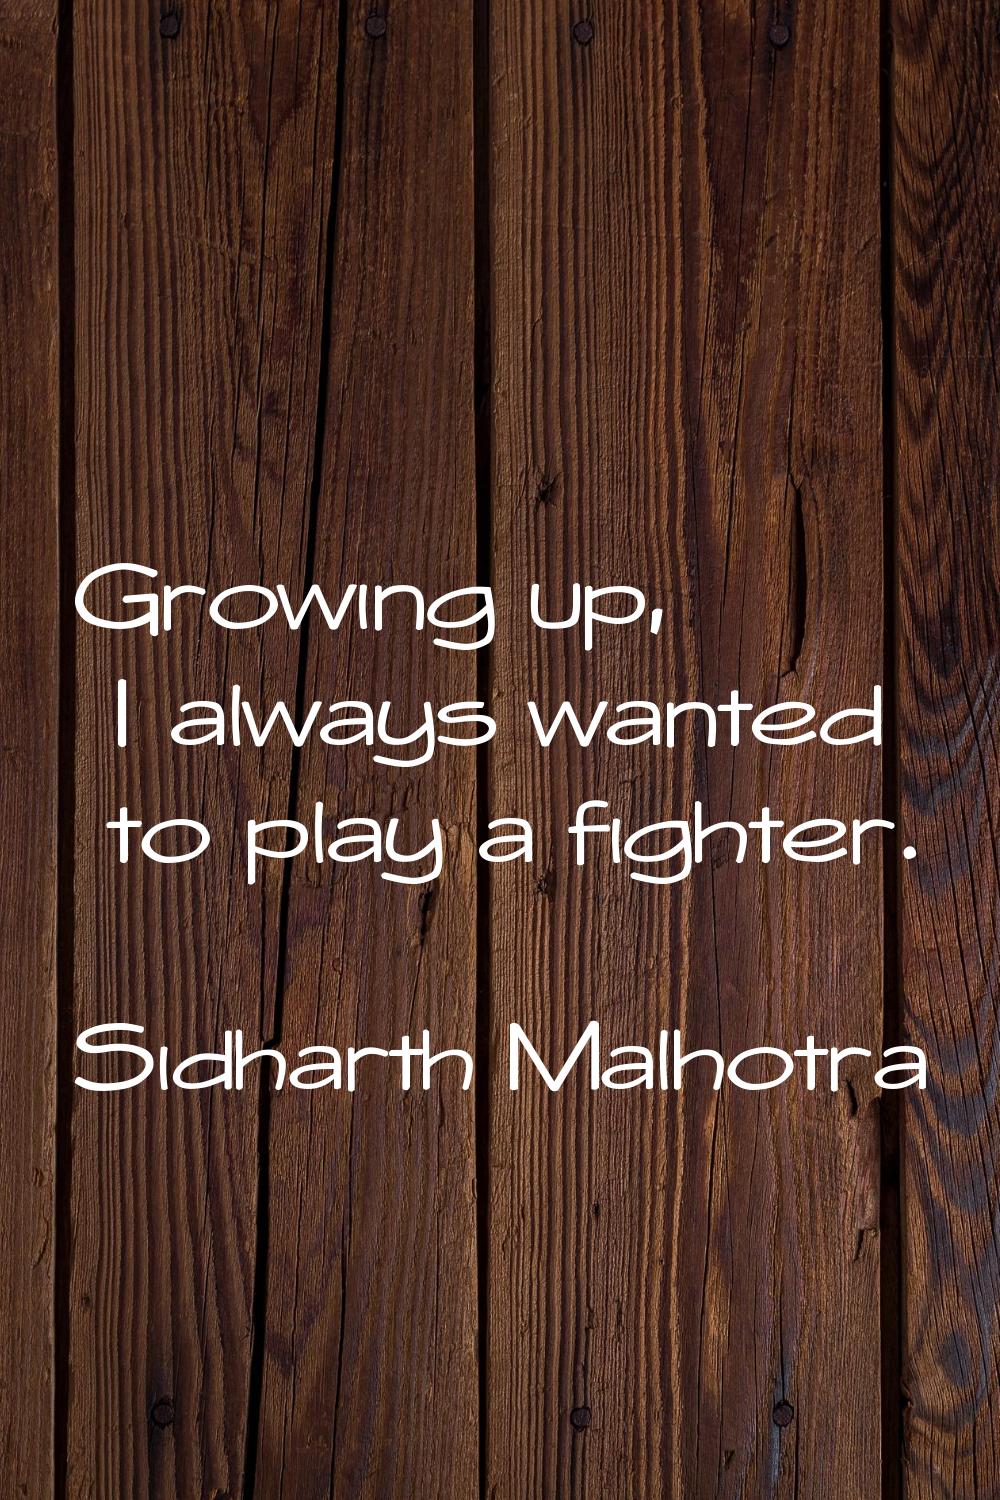 Growing up, I always wanted to play a fighter.